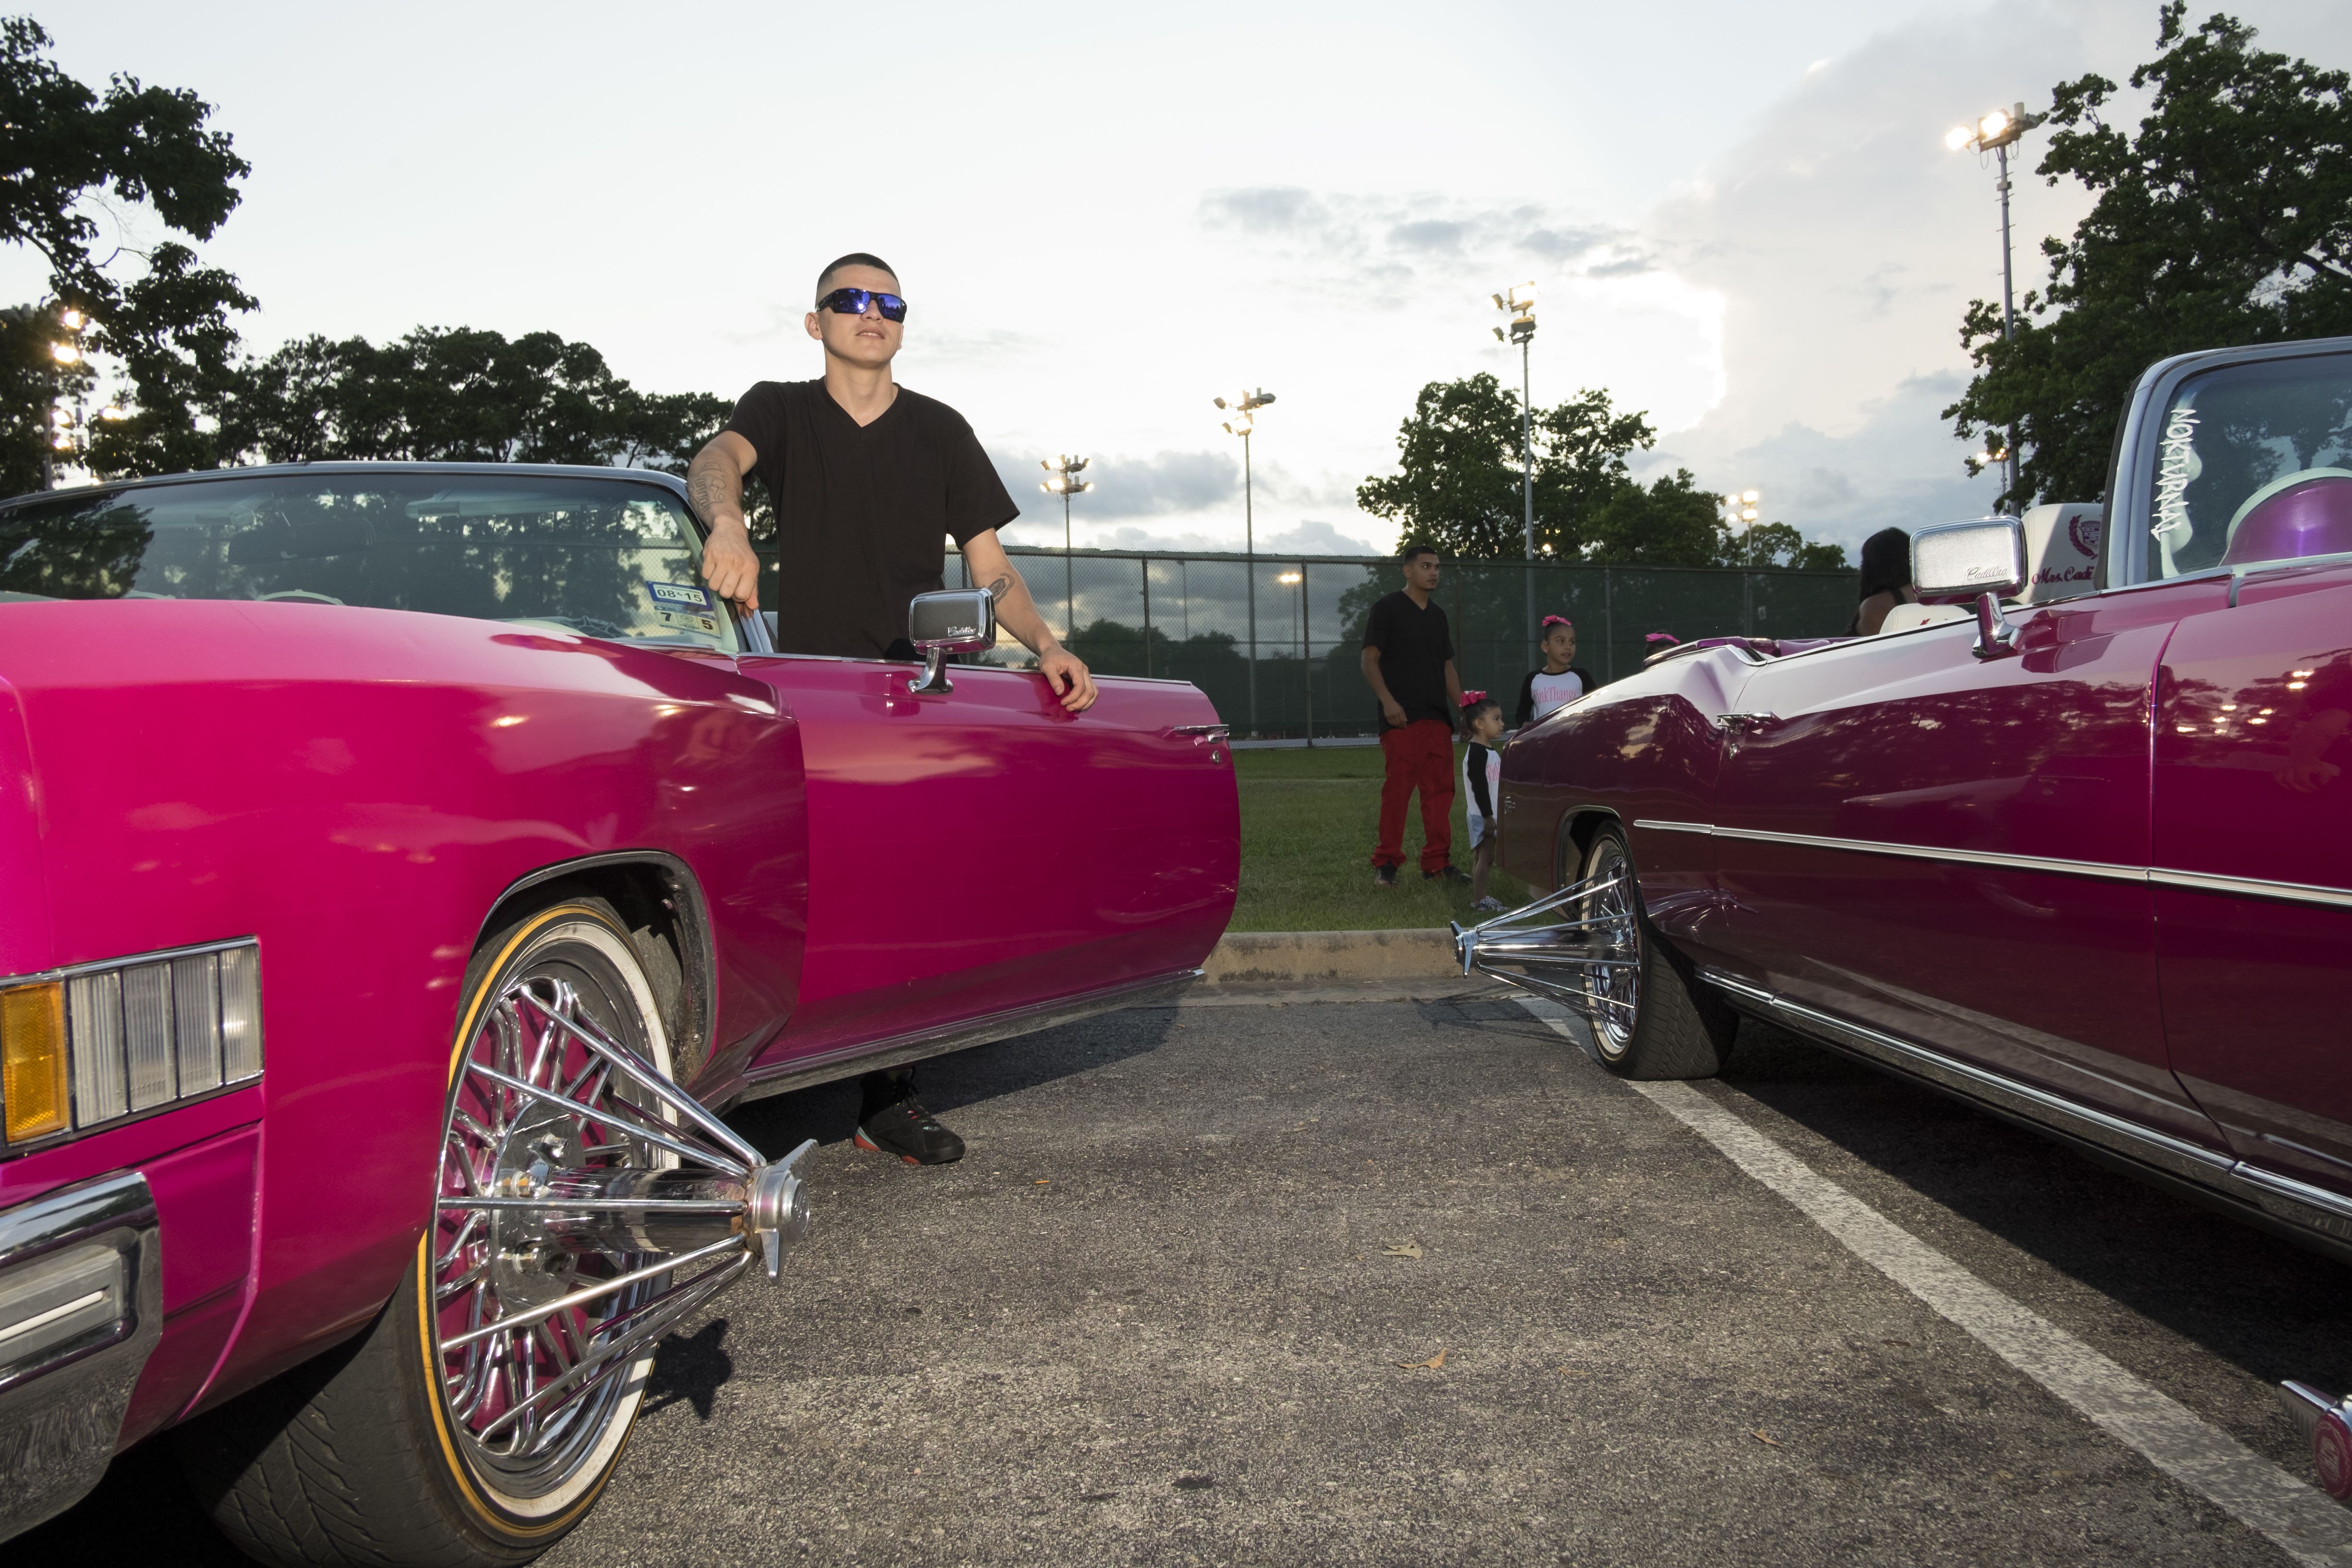 Swangin' through the South: A guide to Houston's SLAB scene